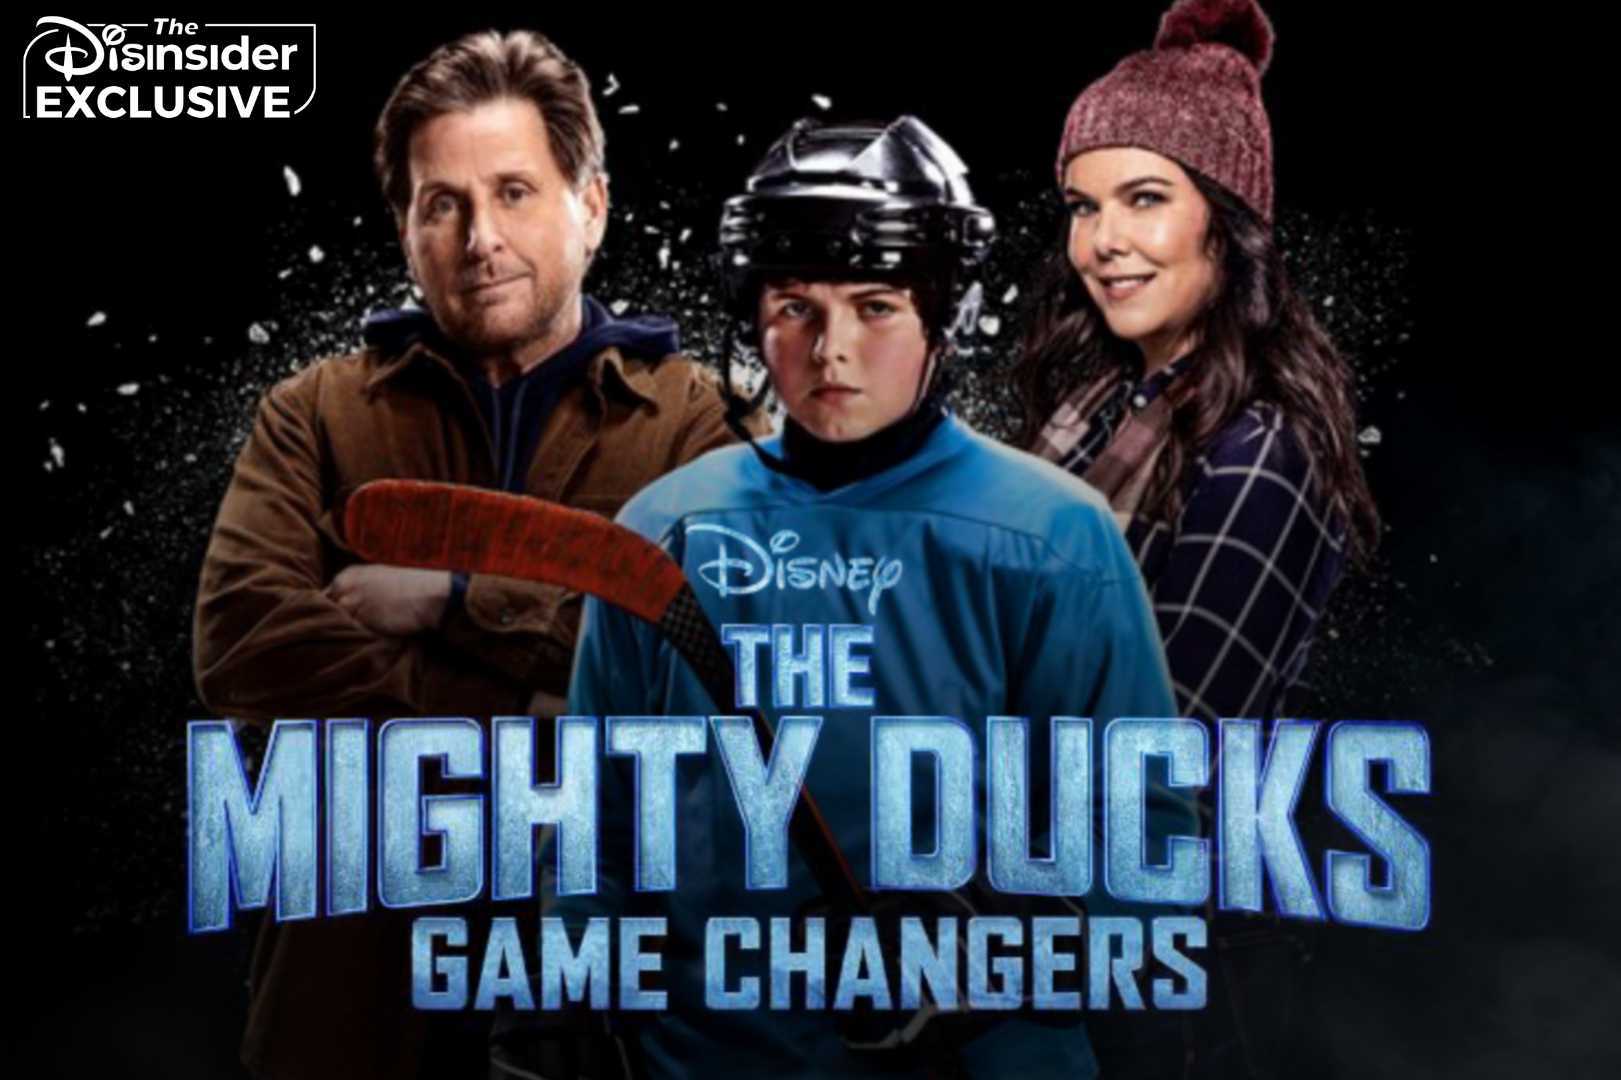 TikTok Star Famous for ADHD-Related Content Cast in 'Mighty Ducks' Season 2